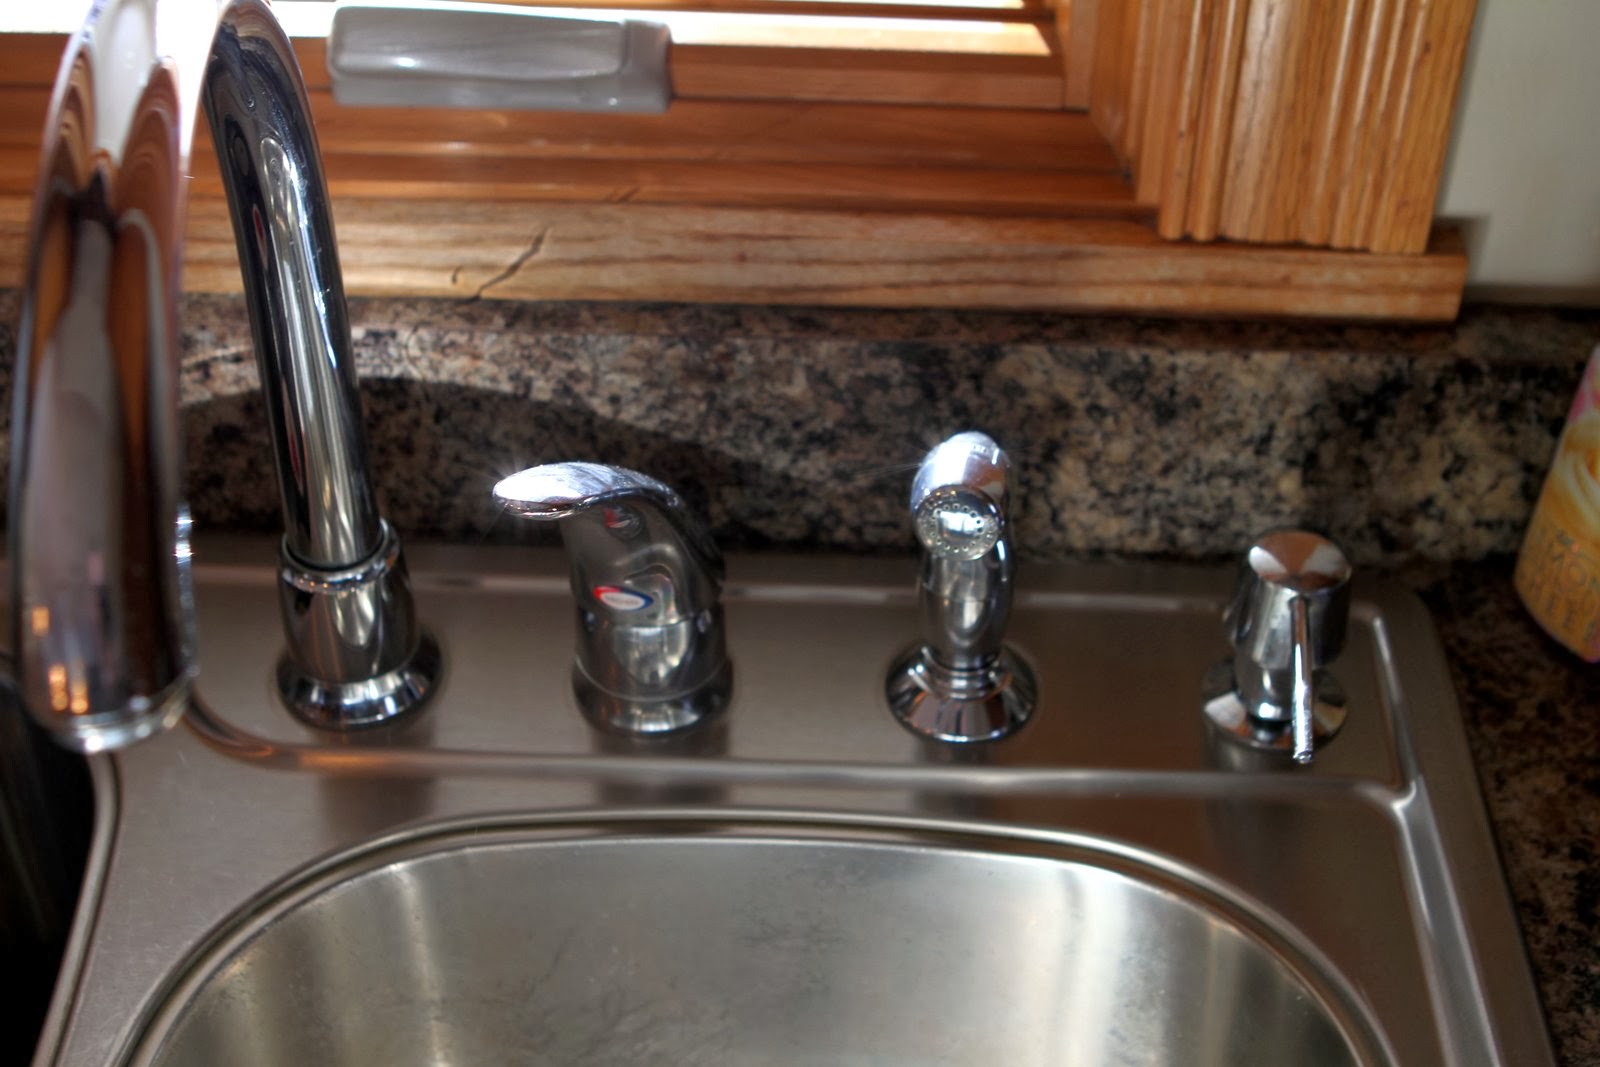 How To Replace Moen Kitchen Faucet Cartridge